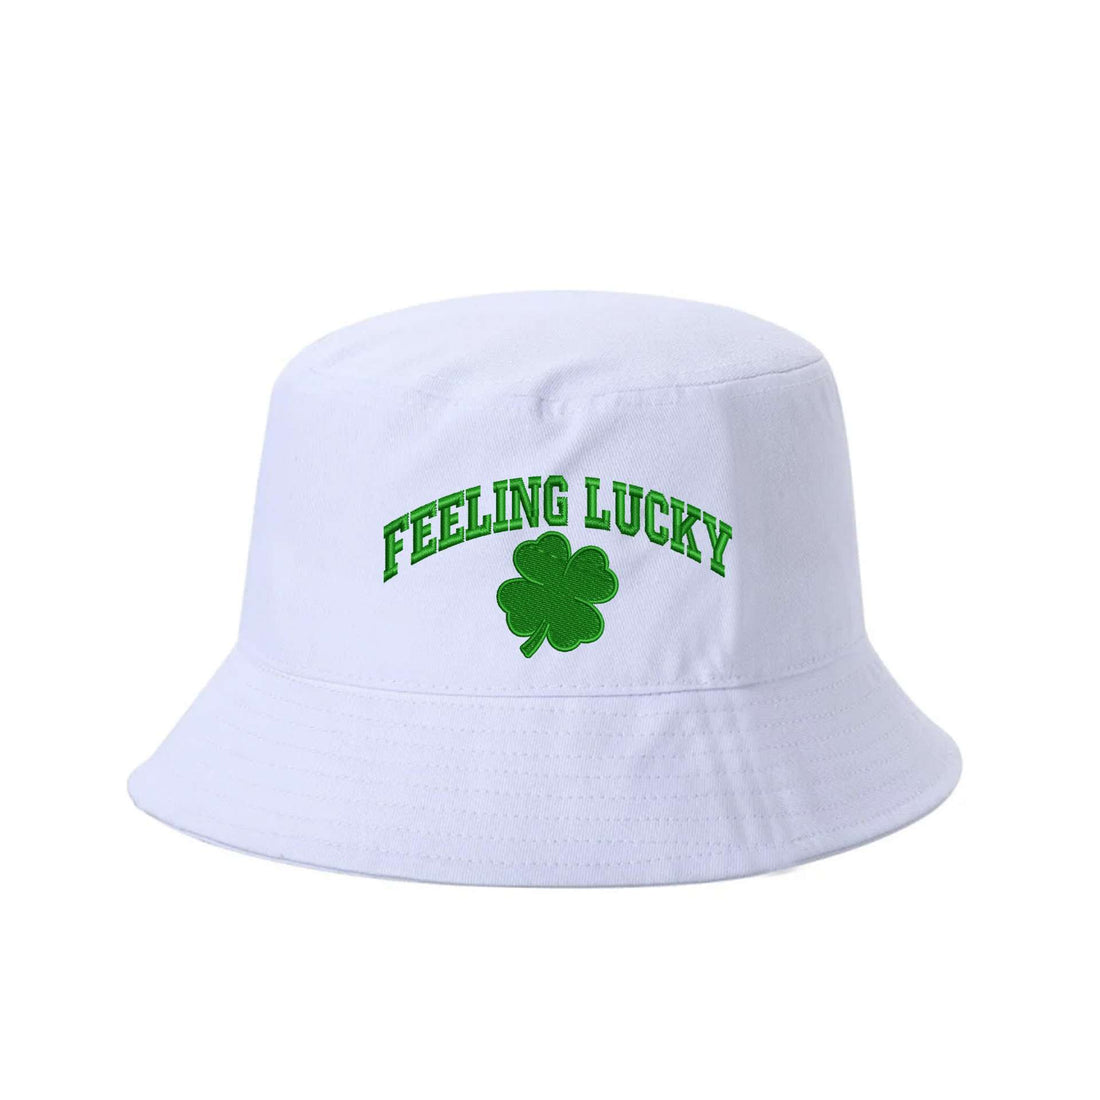 White Bucket Hat embroidered with Feeling Lucky - DSY Lifestyle